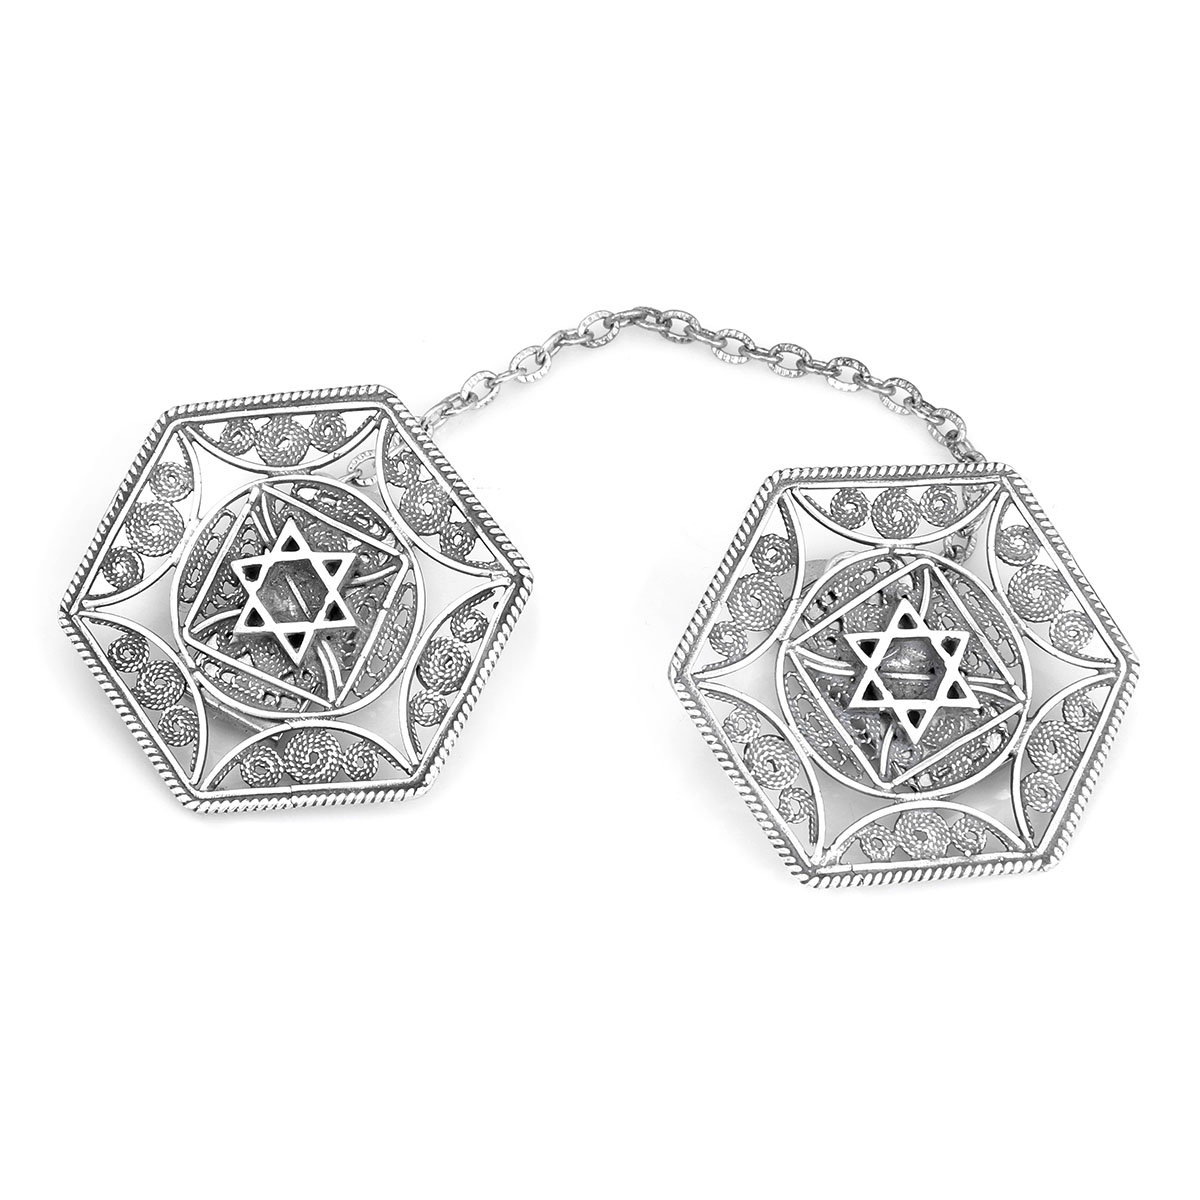 Traditional Yemenite Art Handcrafted Elegant Sterling Silver Tallit Clips With Star of David Design - 1